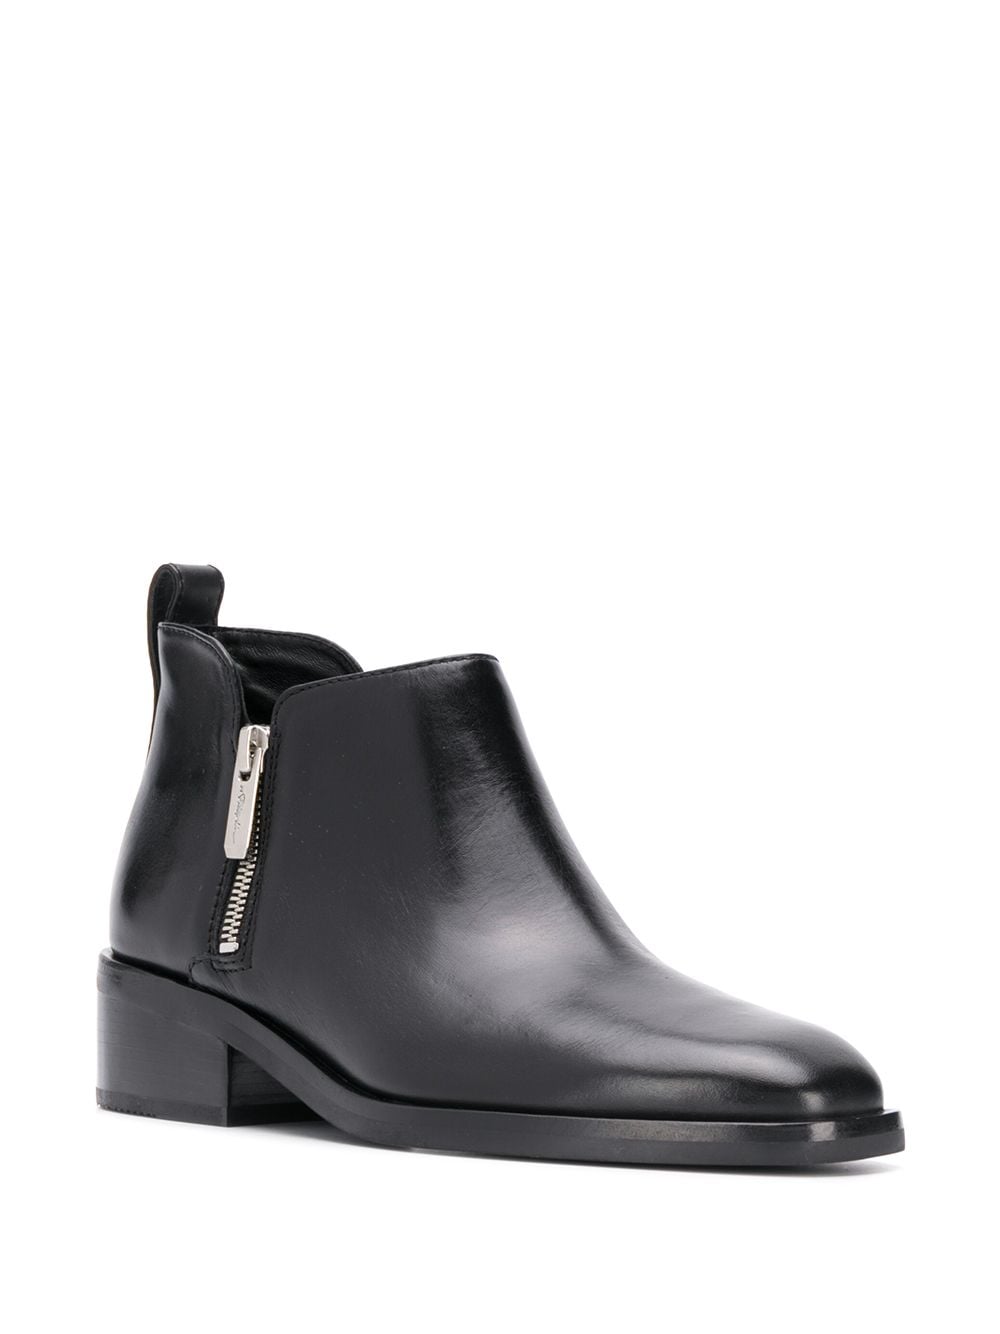 Image 2 of 3.1 Phillip Lim Alexa 40 ankle boots